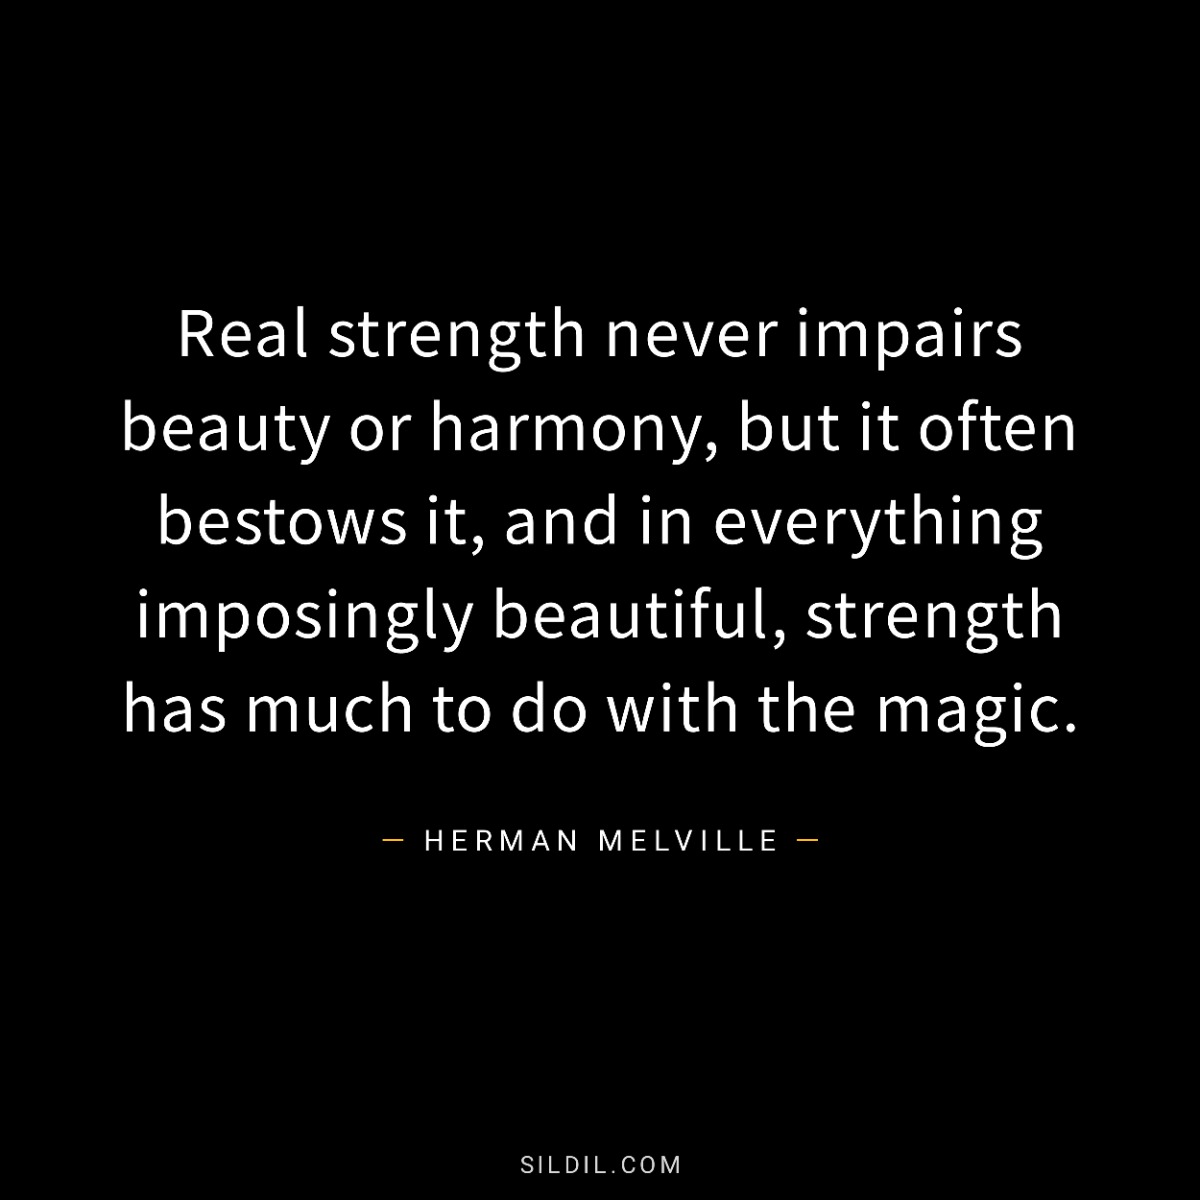 Real strength never impairs beauty or harmony, but it often bestows it, and in everything imposingly beautiful, strength has much to do with the magic.